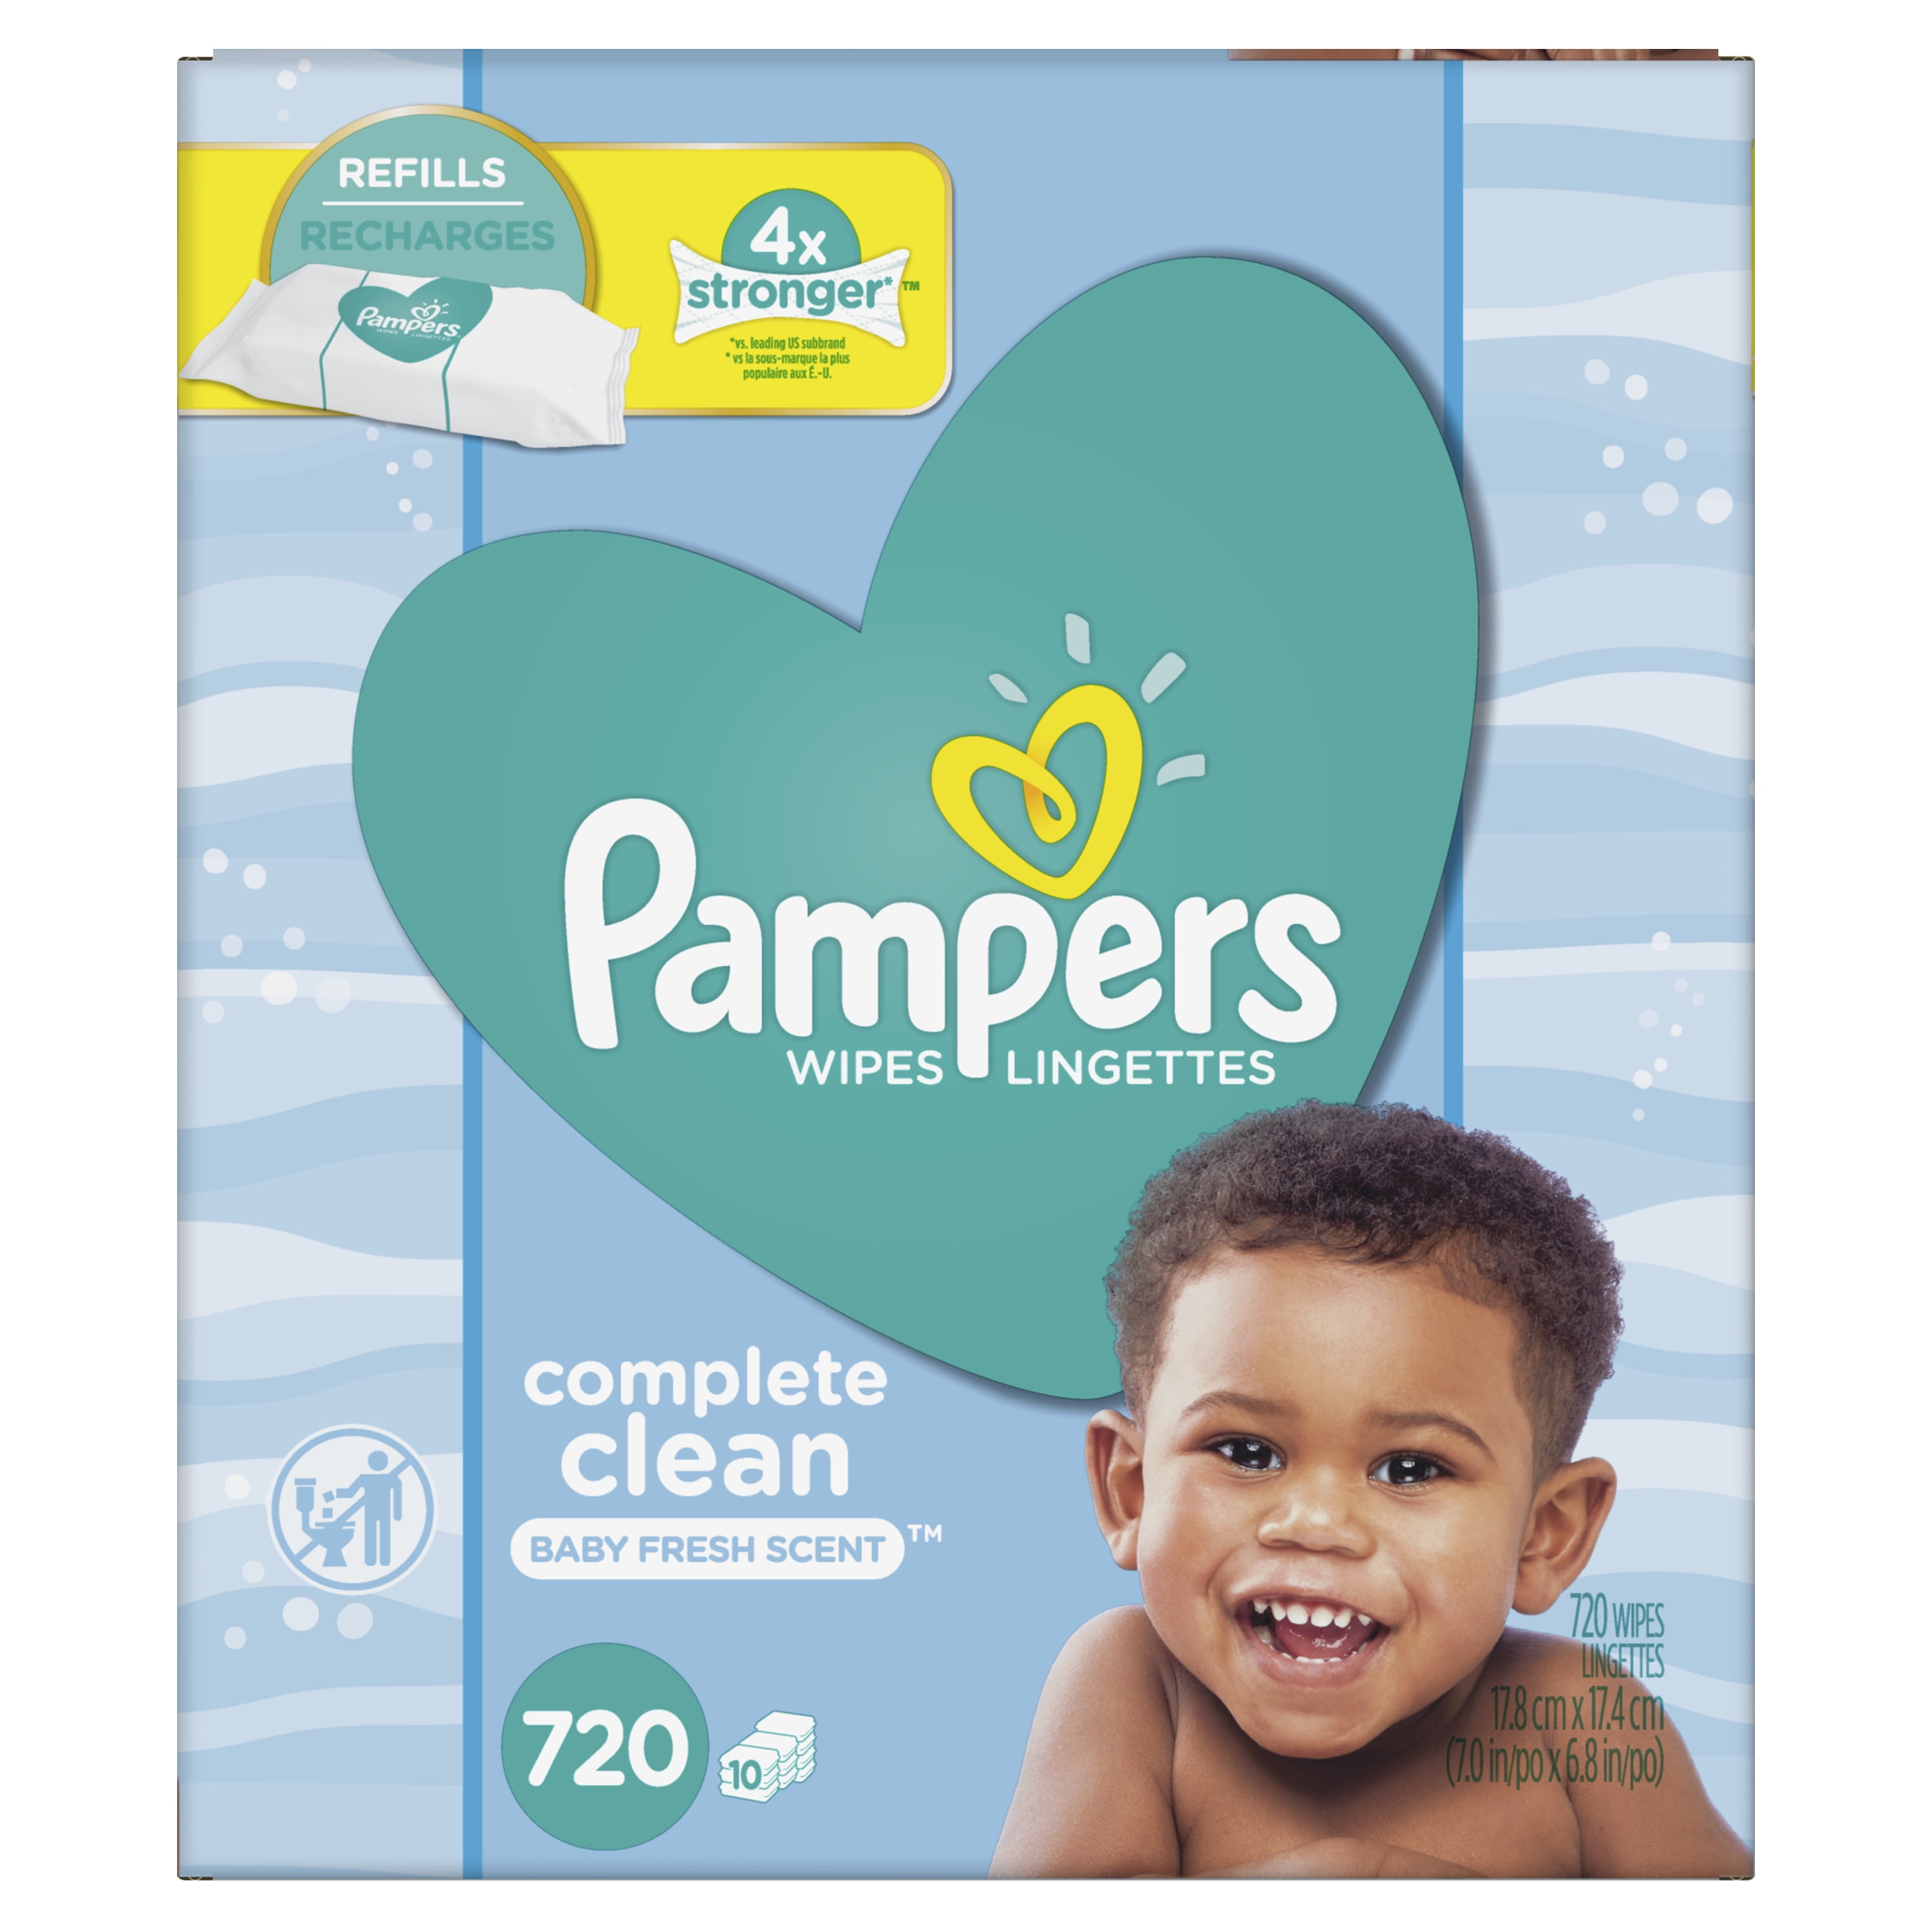 Pampers Baby Wipes, Complete Clean Scented, 10 Refill Packs, 720